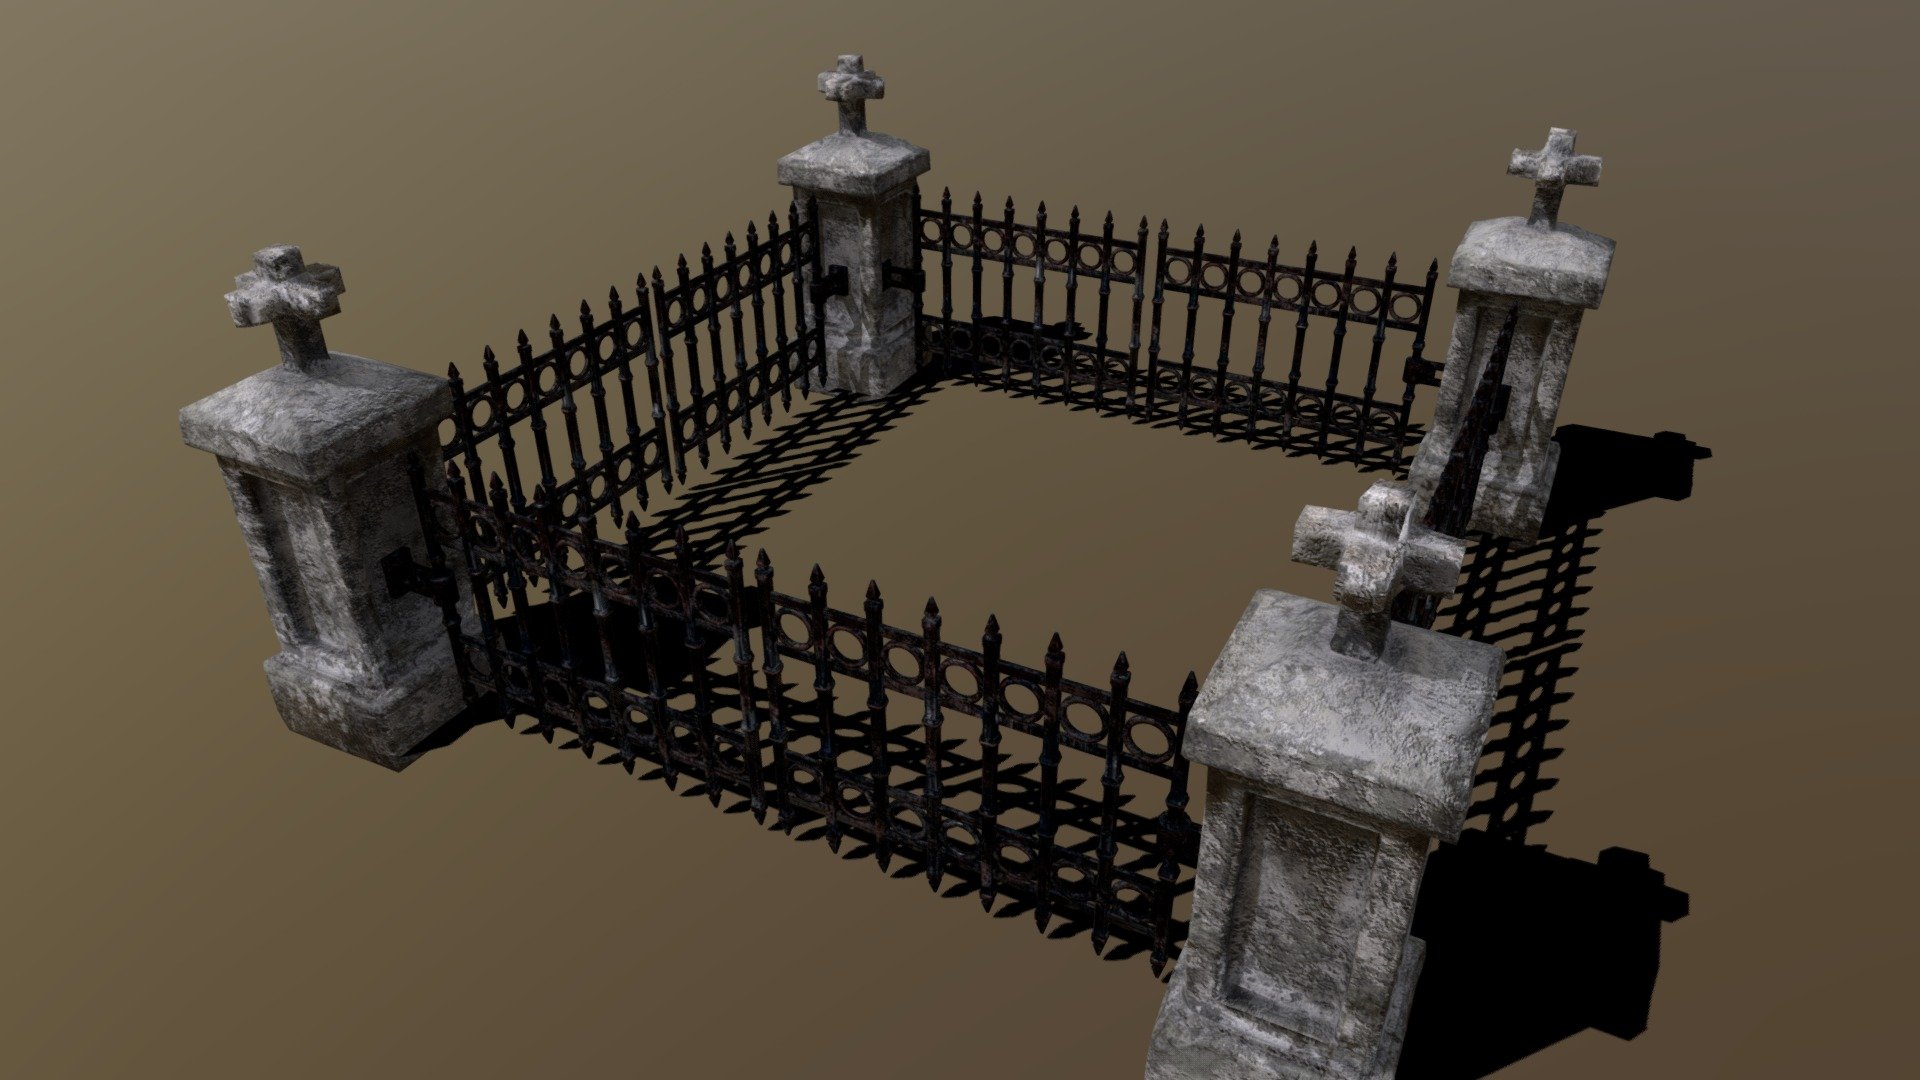 FBX Models
2K Textures
Low Poly - Cemetery Small Fence & Posts (Game Ready) - 3D model by Sculpting Tools (@InterFox) 3d model